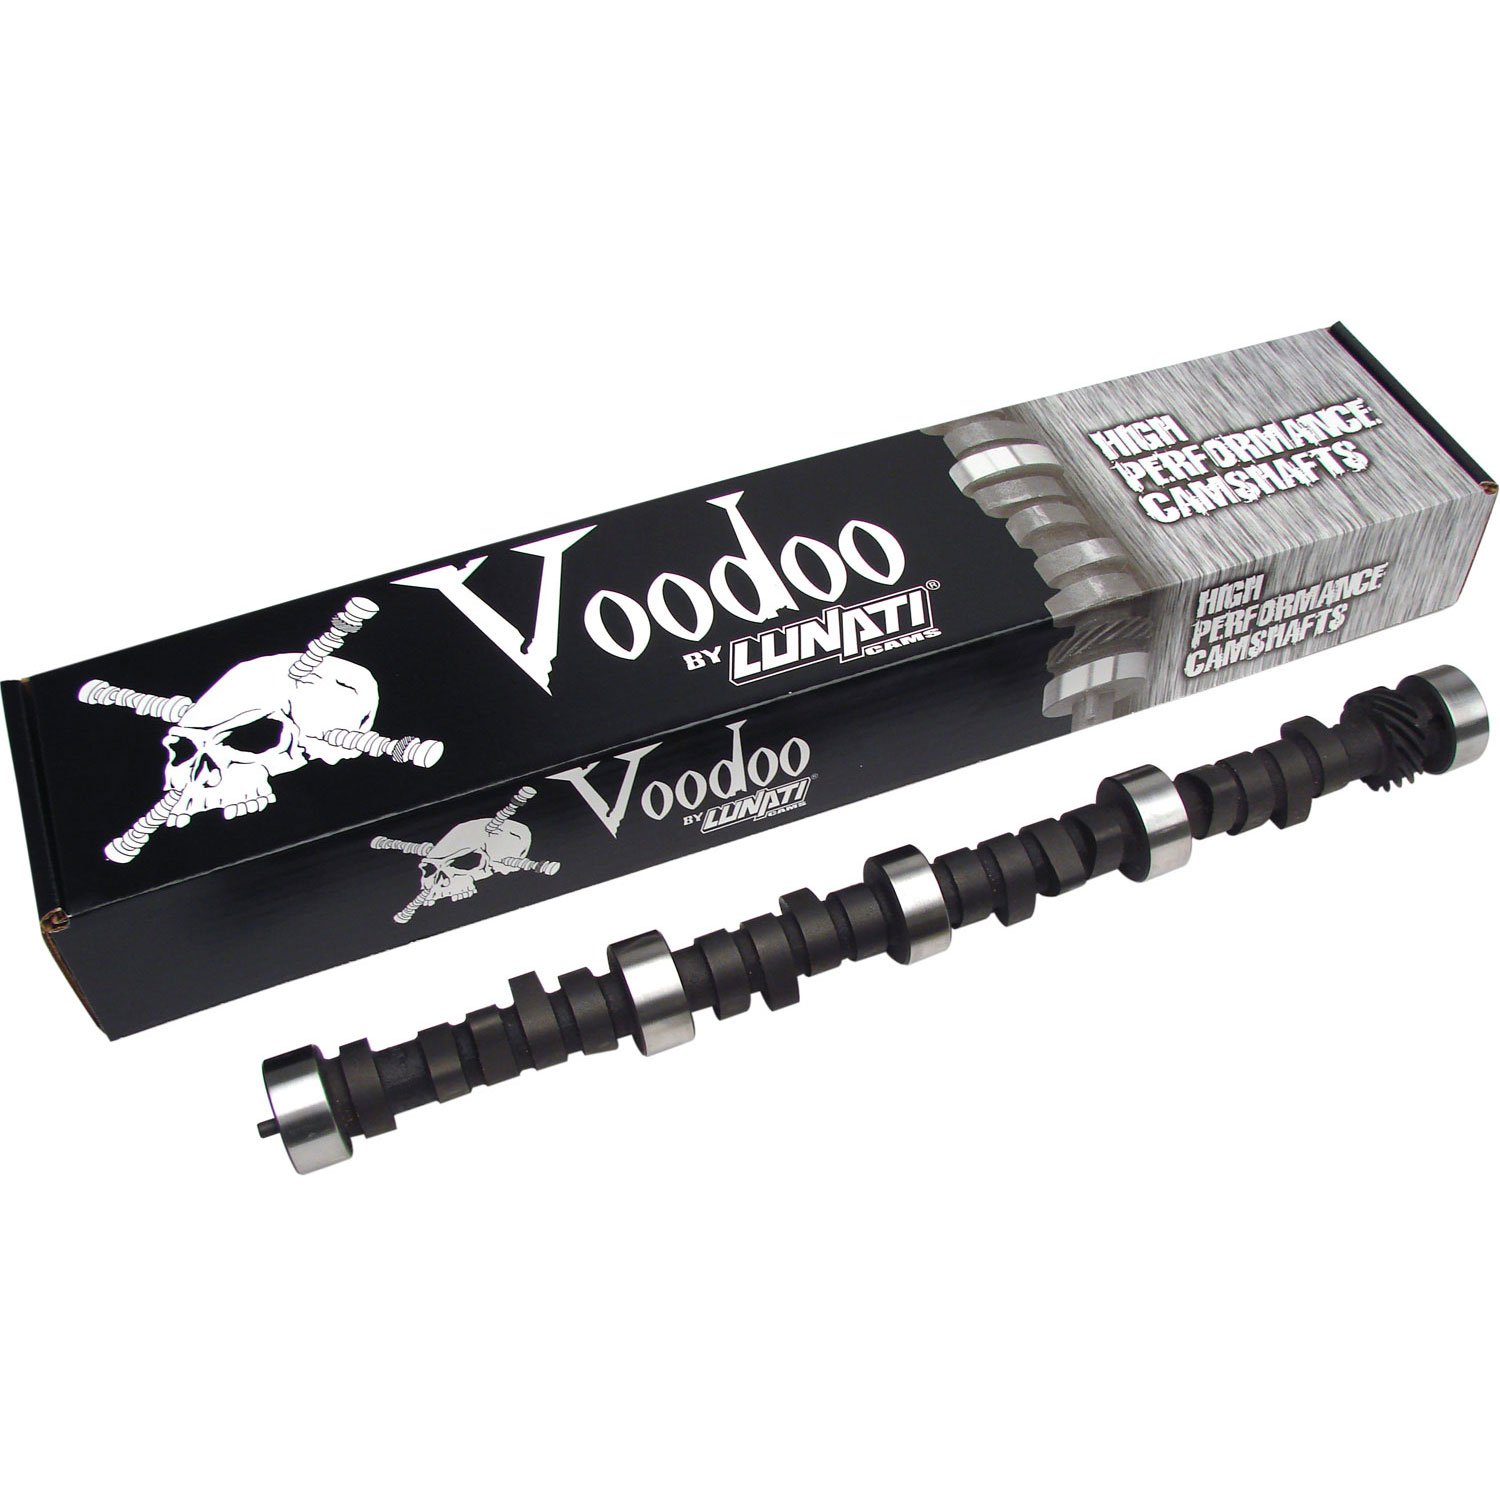 Voodoo Hydraulic Flat Tappet Camshaft Ford 352-428 Lift: .503"/.524"